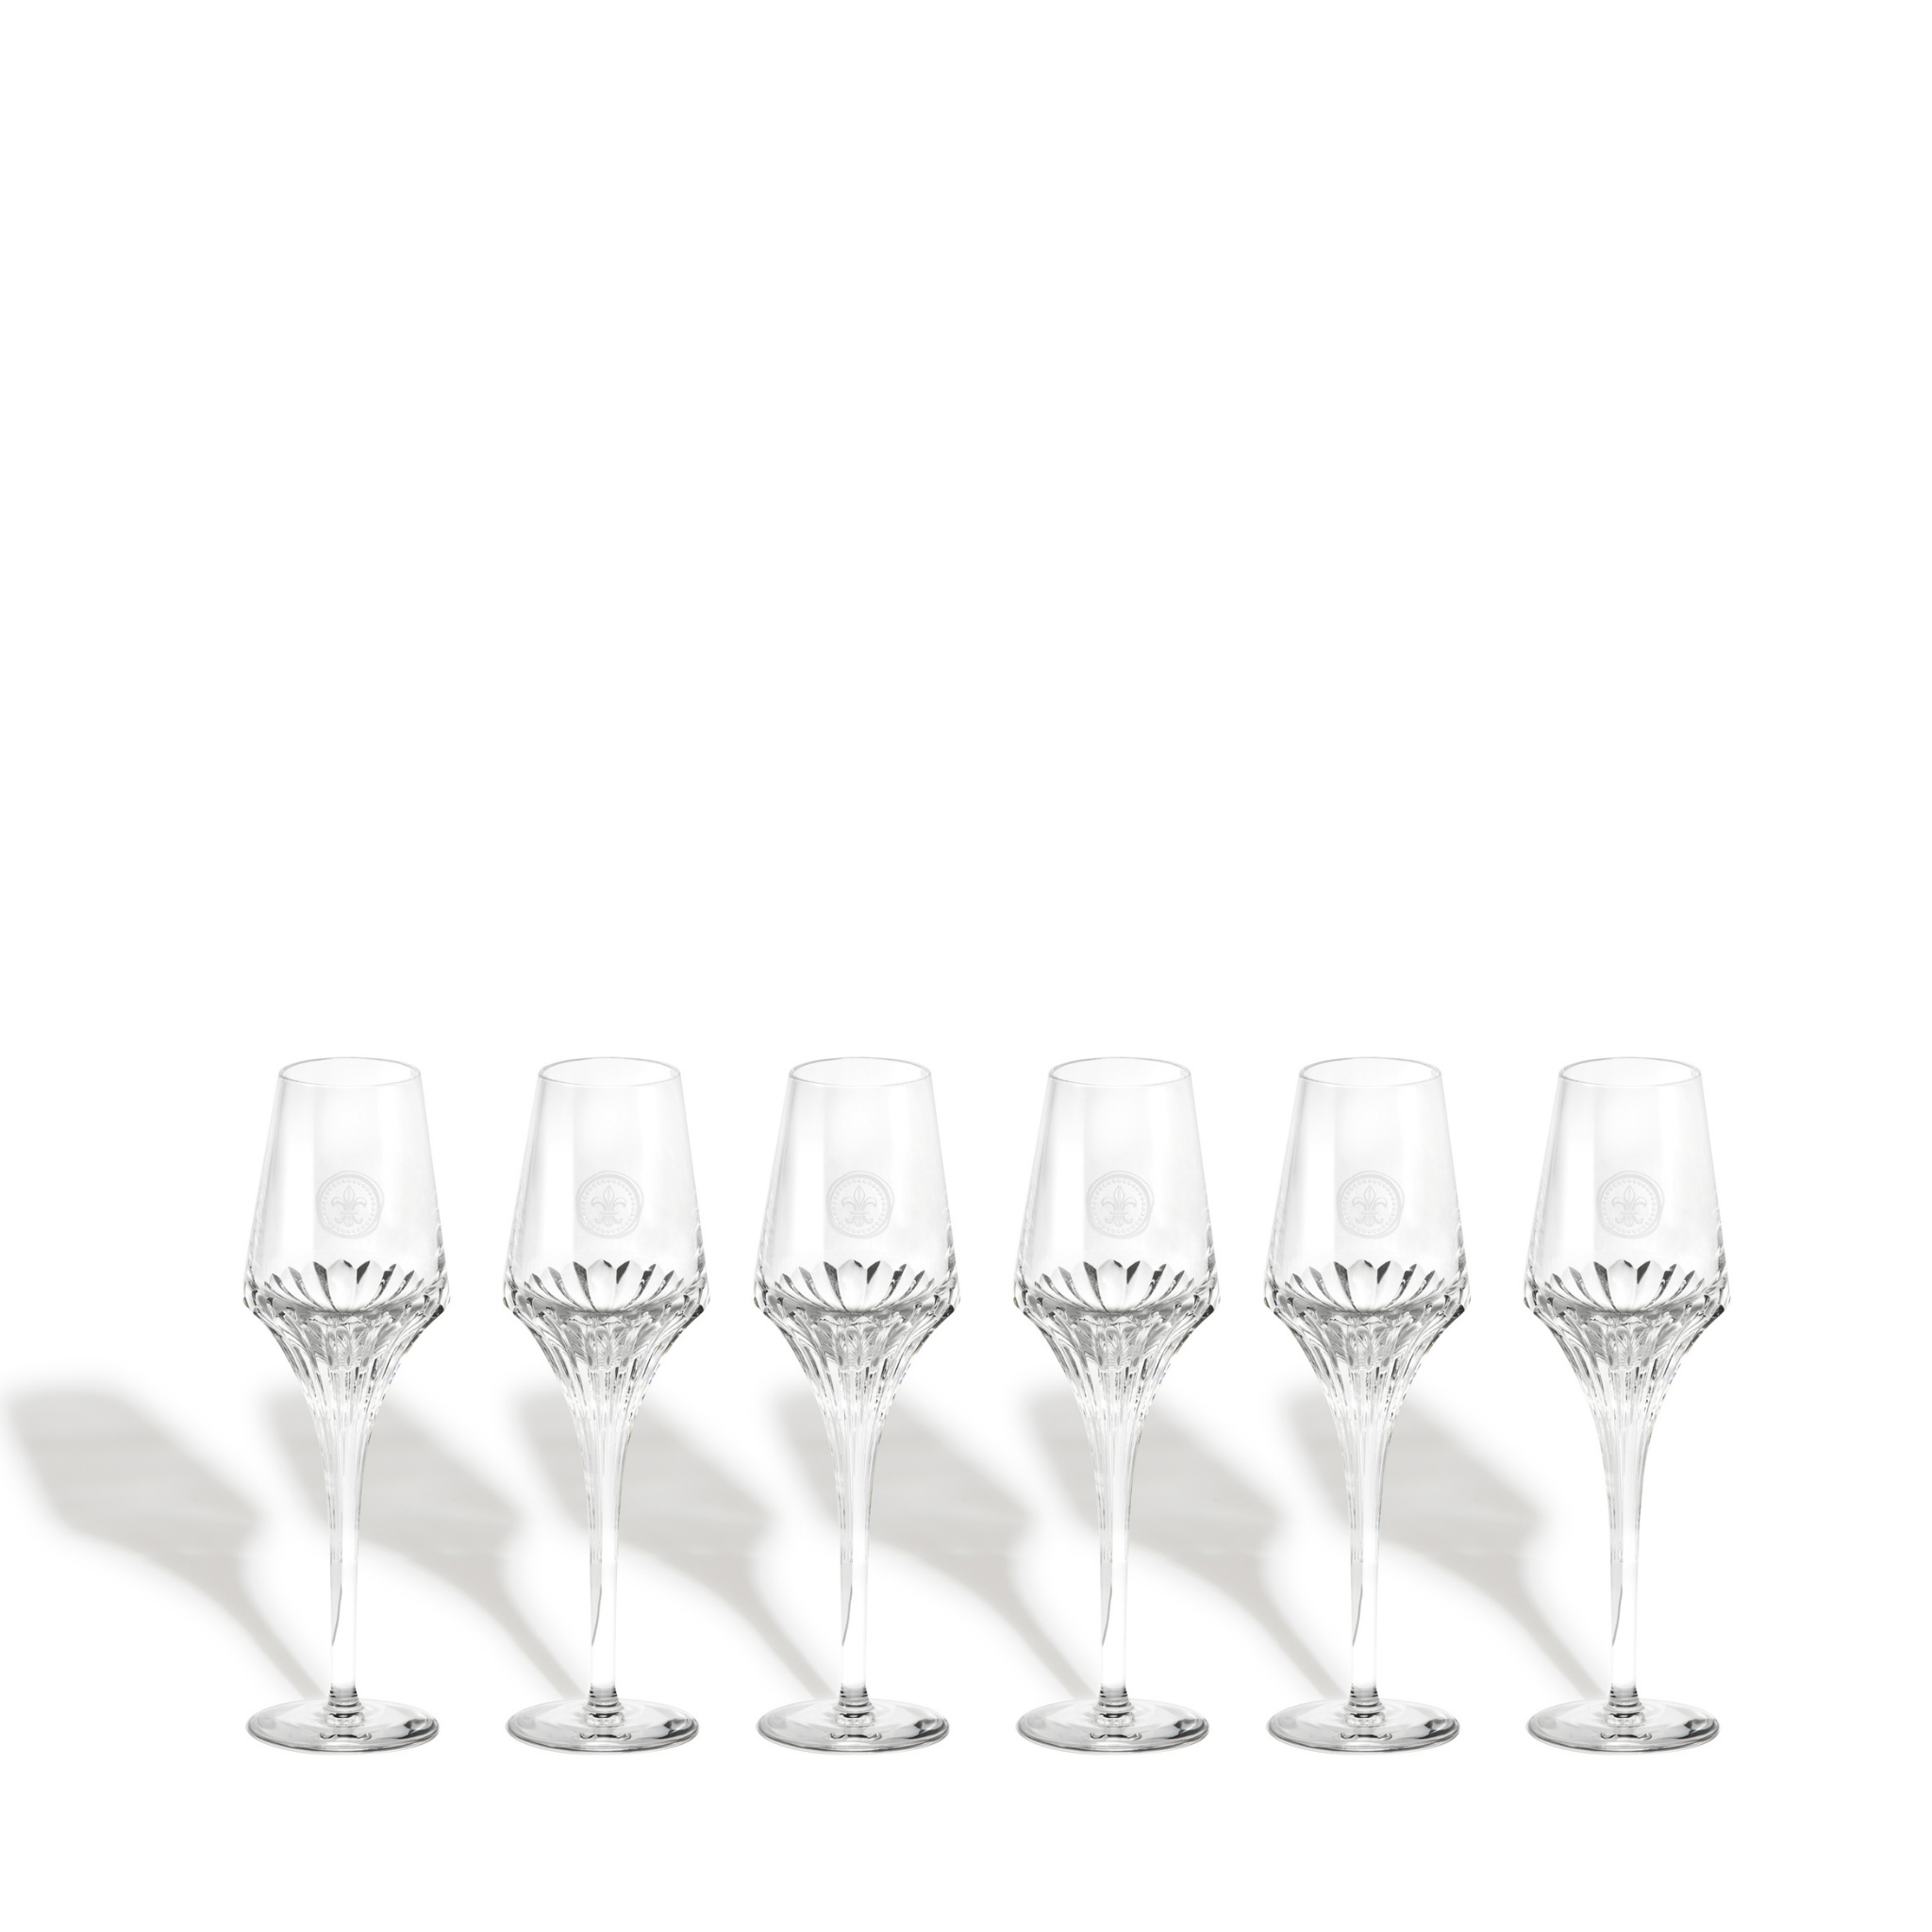 A packstot of six LOUIS XIII crystal glasses on a white background